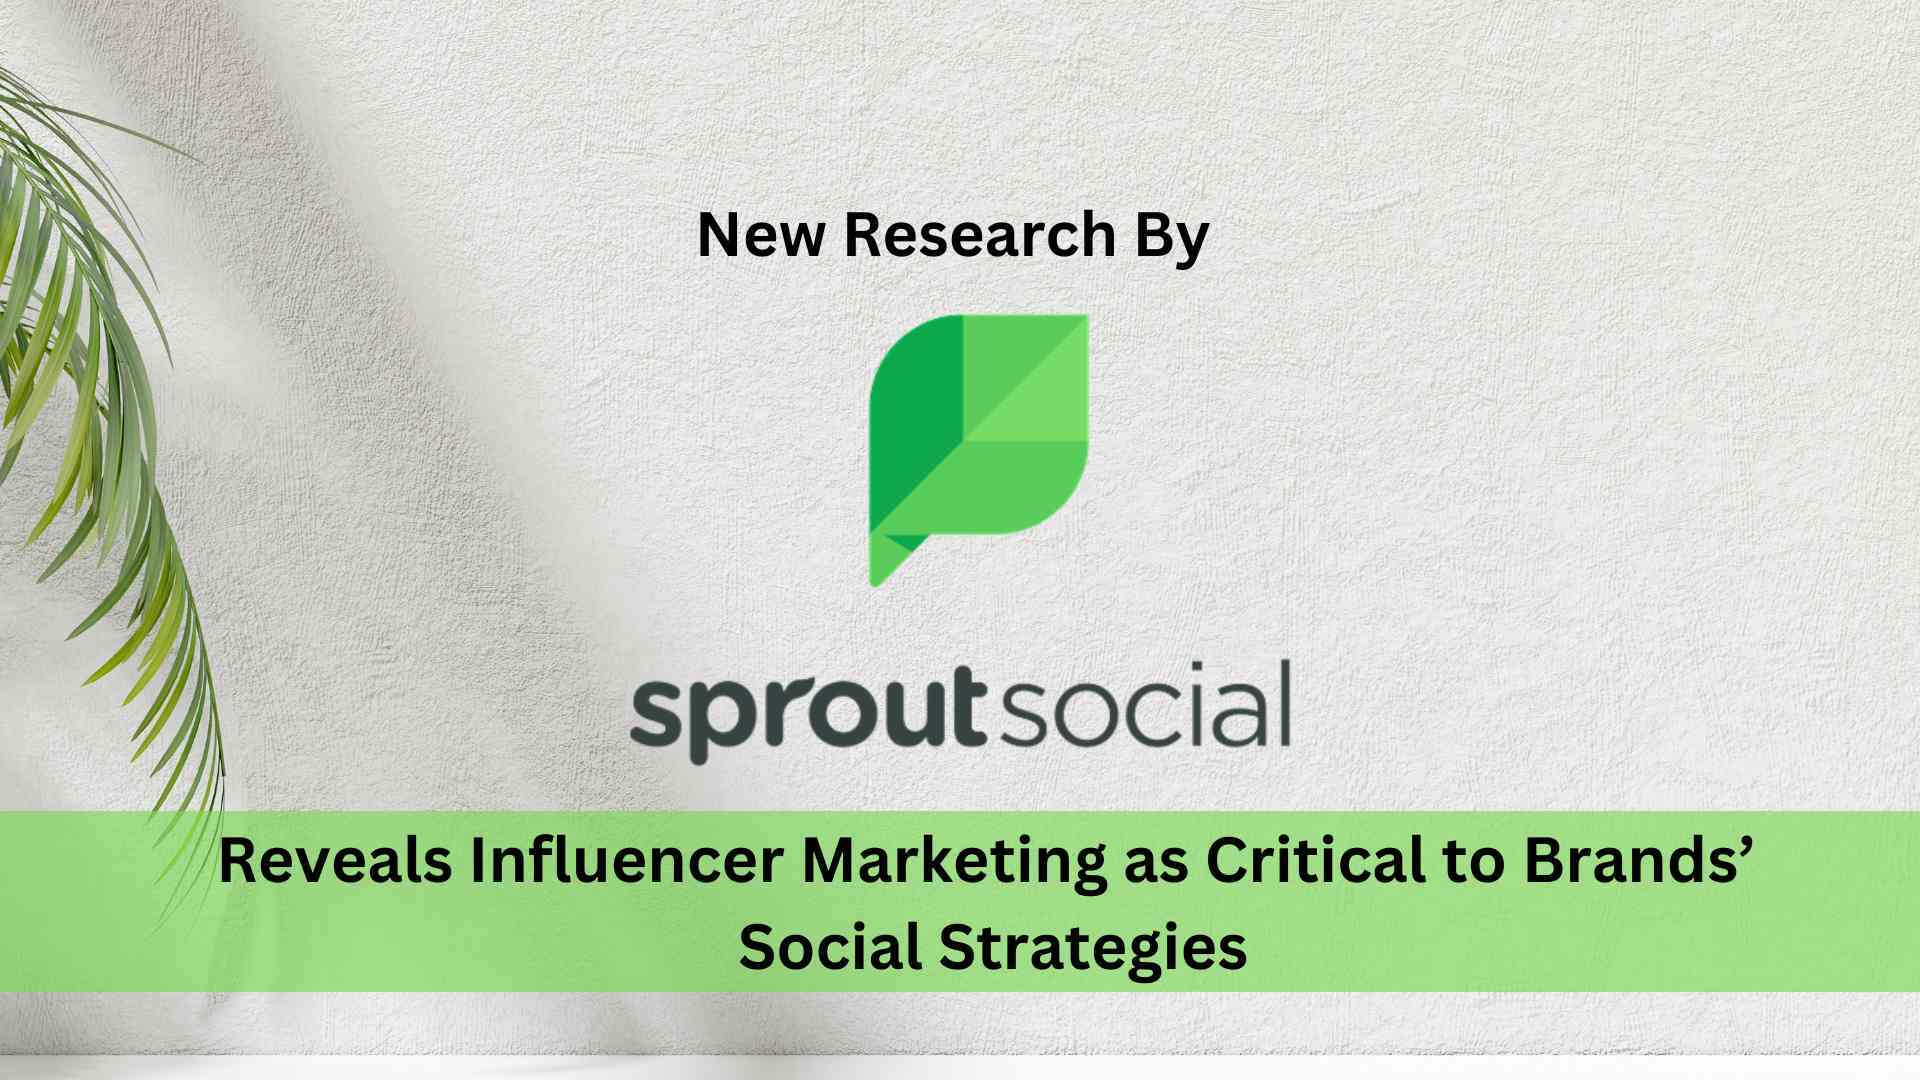 New Research Reveals Influencer Marketing as Critical to Brands’ Social Strategies